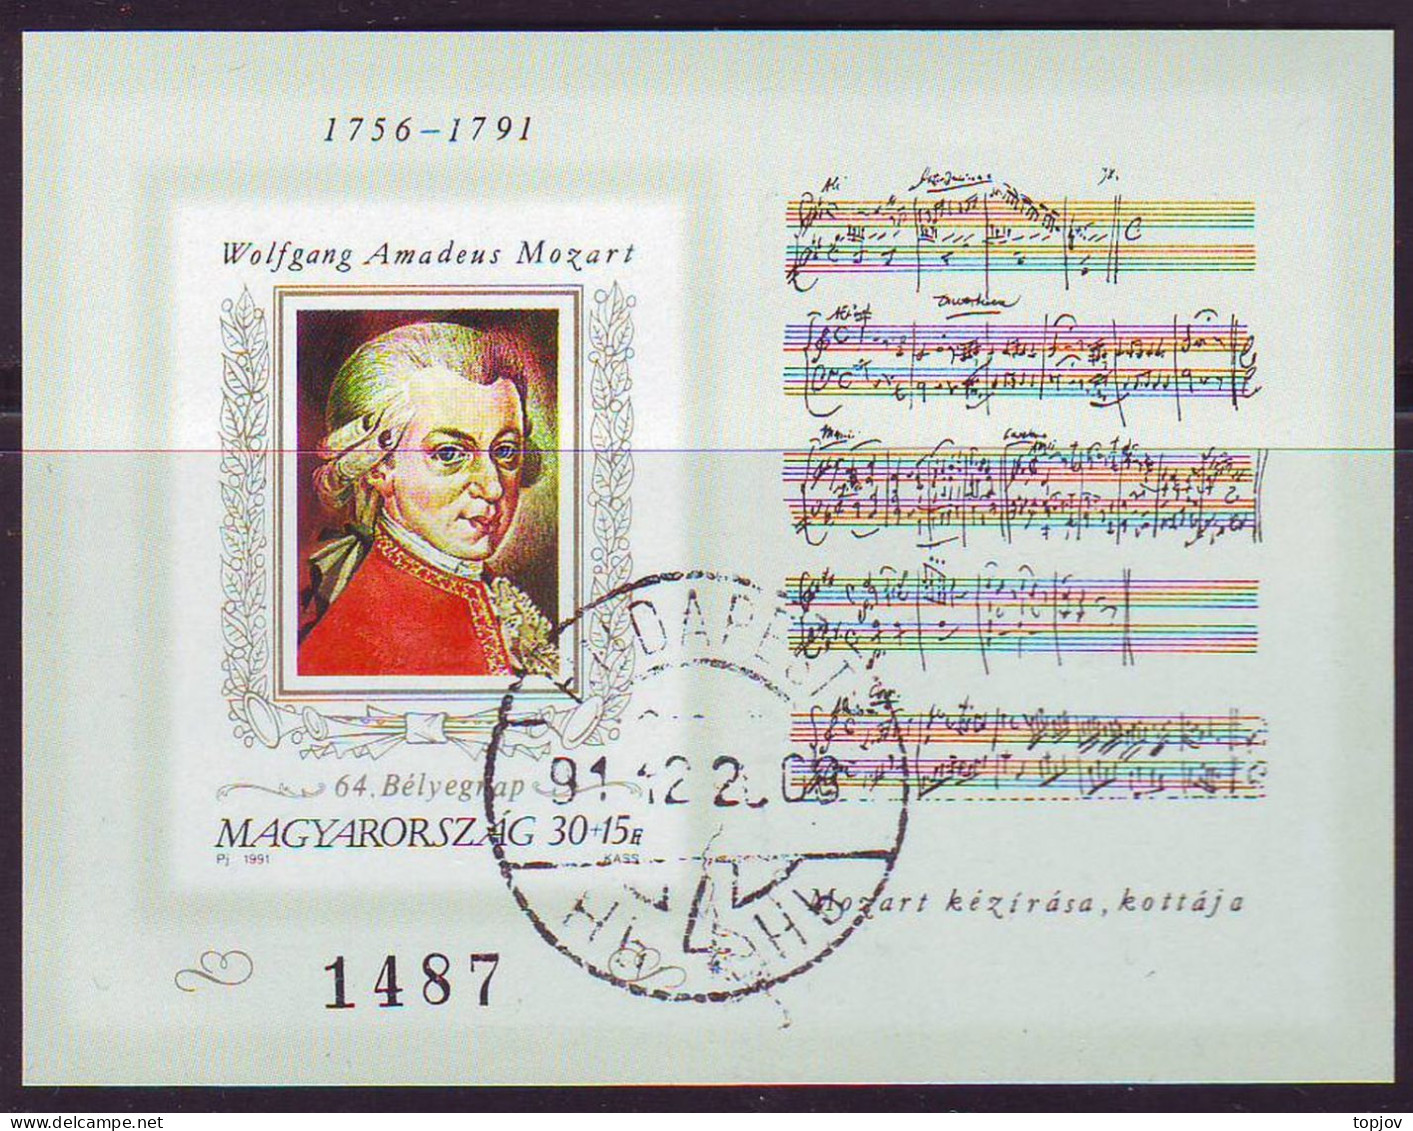 HUNGARY - MOZART MUSIC HANDcuff - IMPERF - Used - 1991 - Unused Stamps